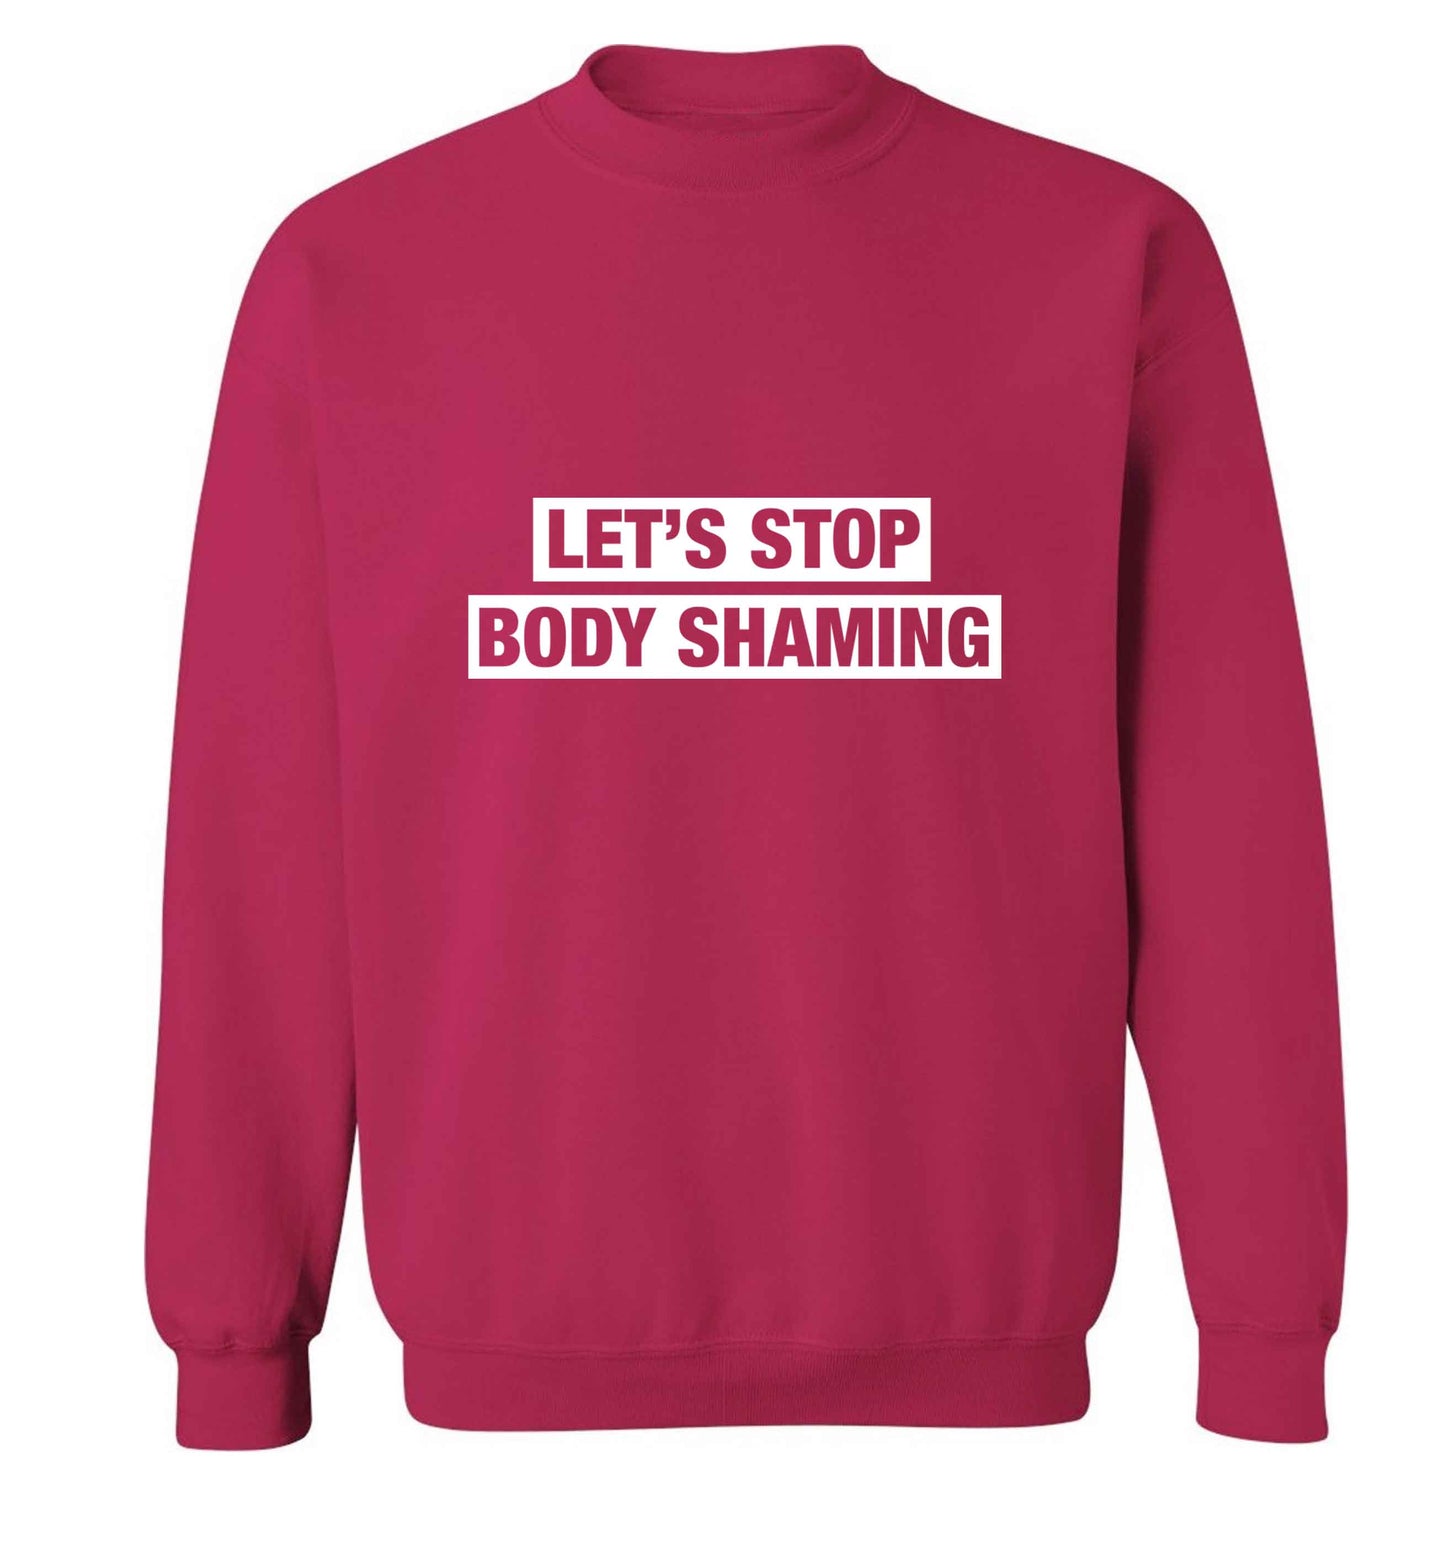 Let's stop body shaming adult's unisex pink sweater 2XL